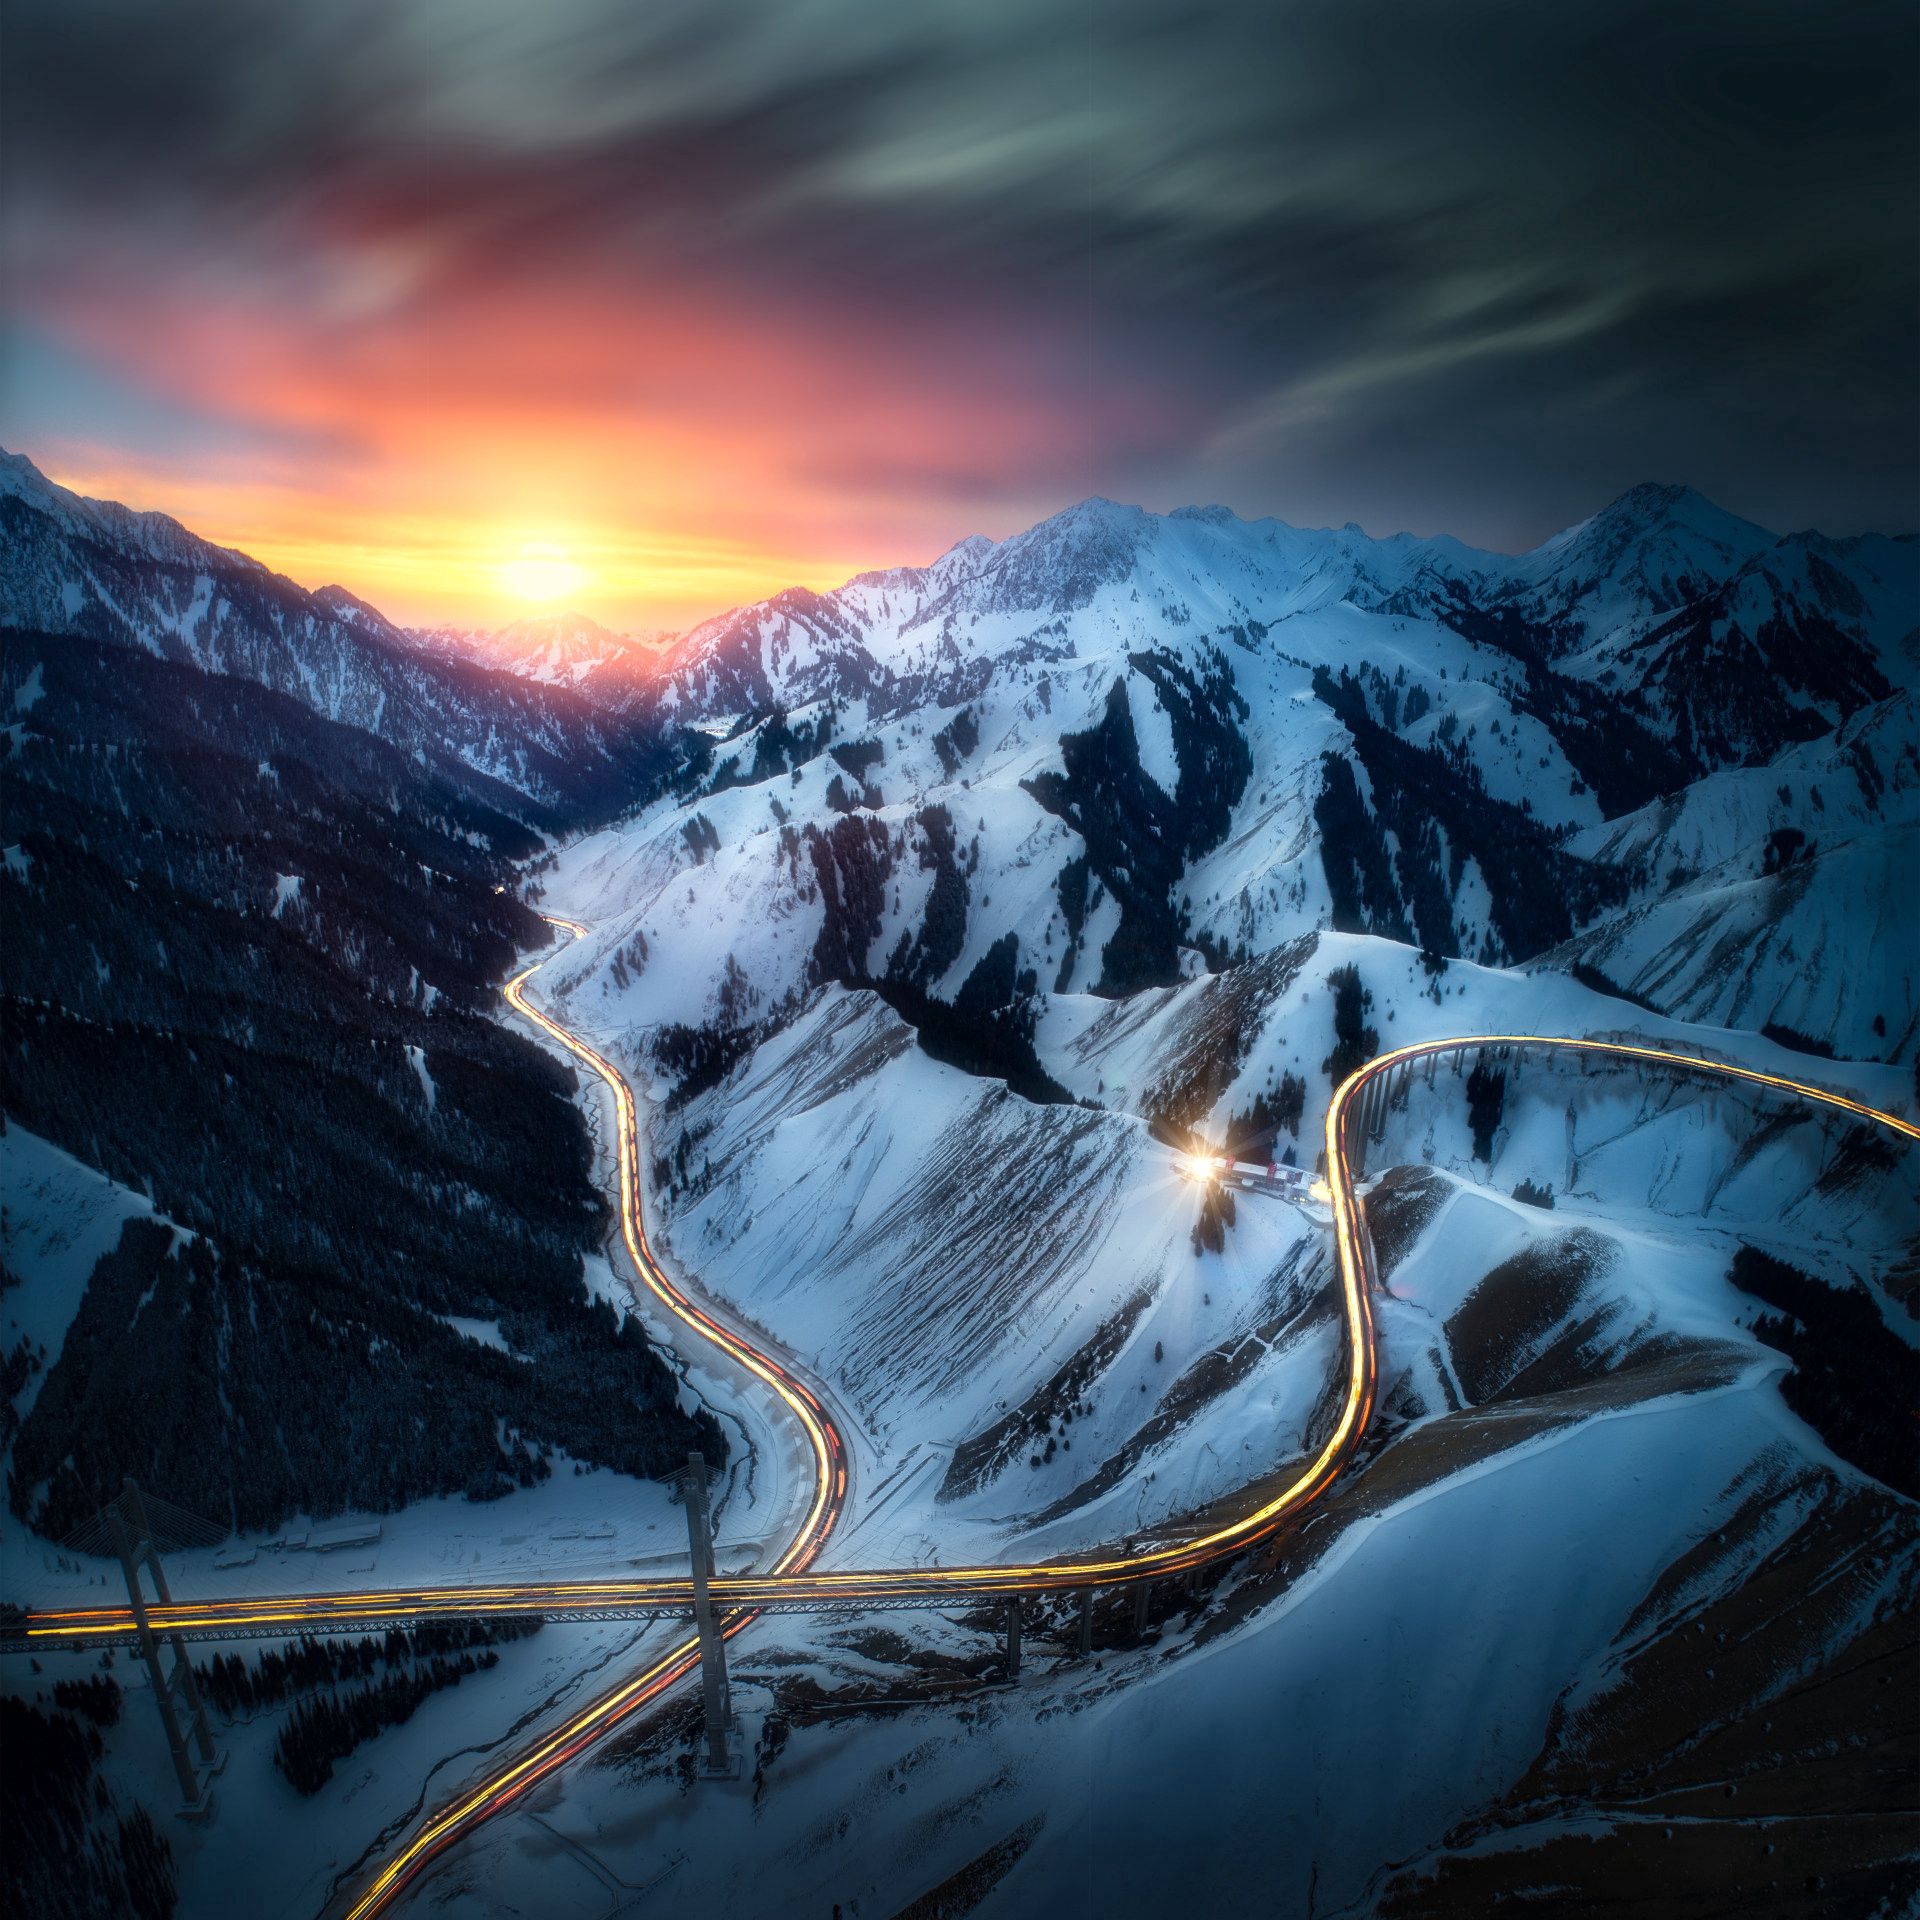 roads, view from above, sunset, landscape, nature, mountains